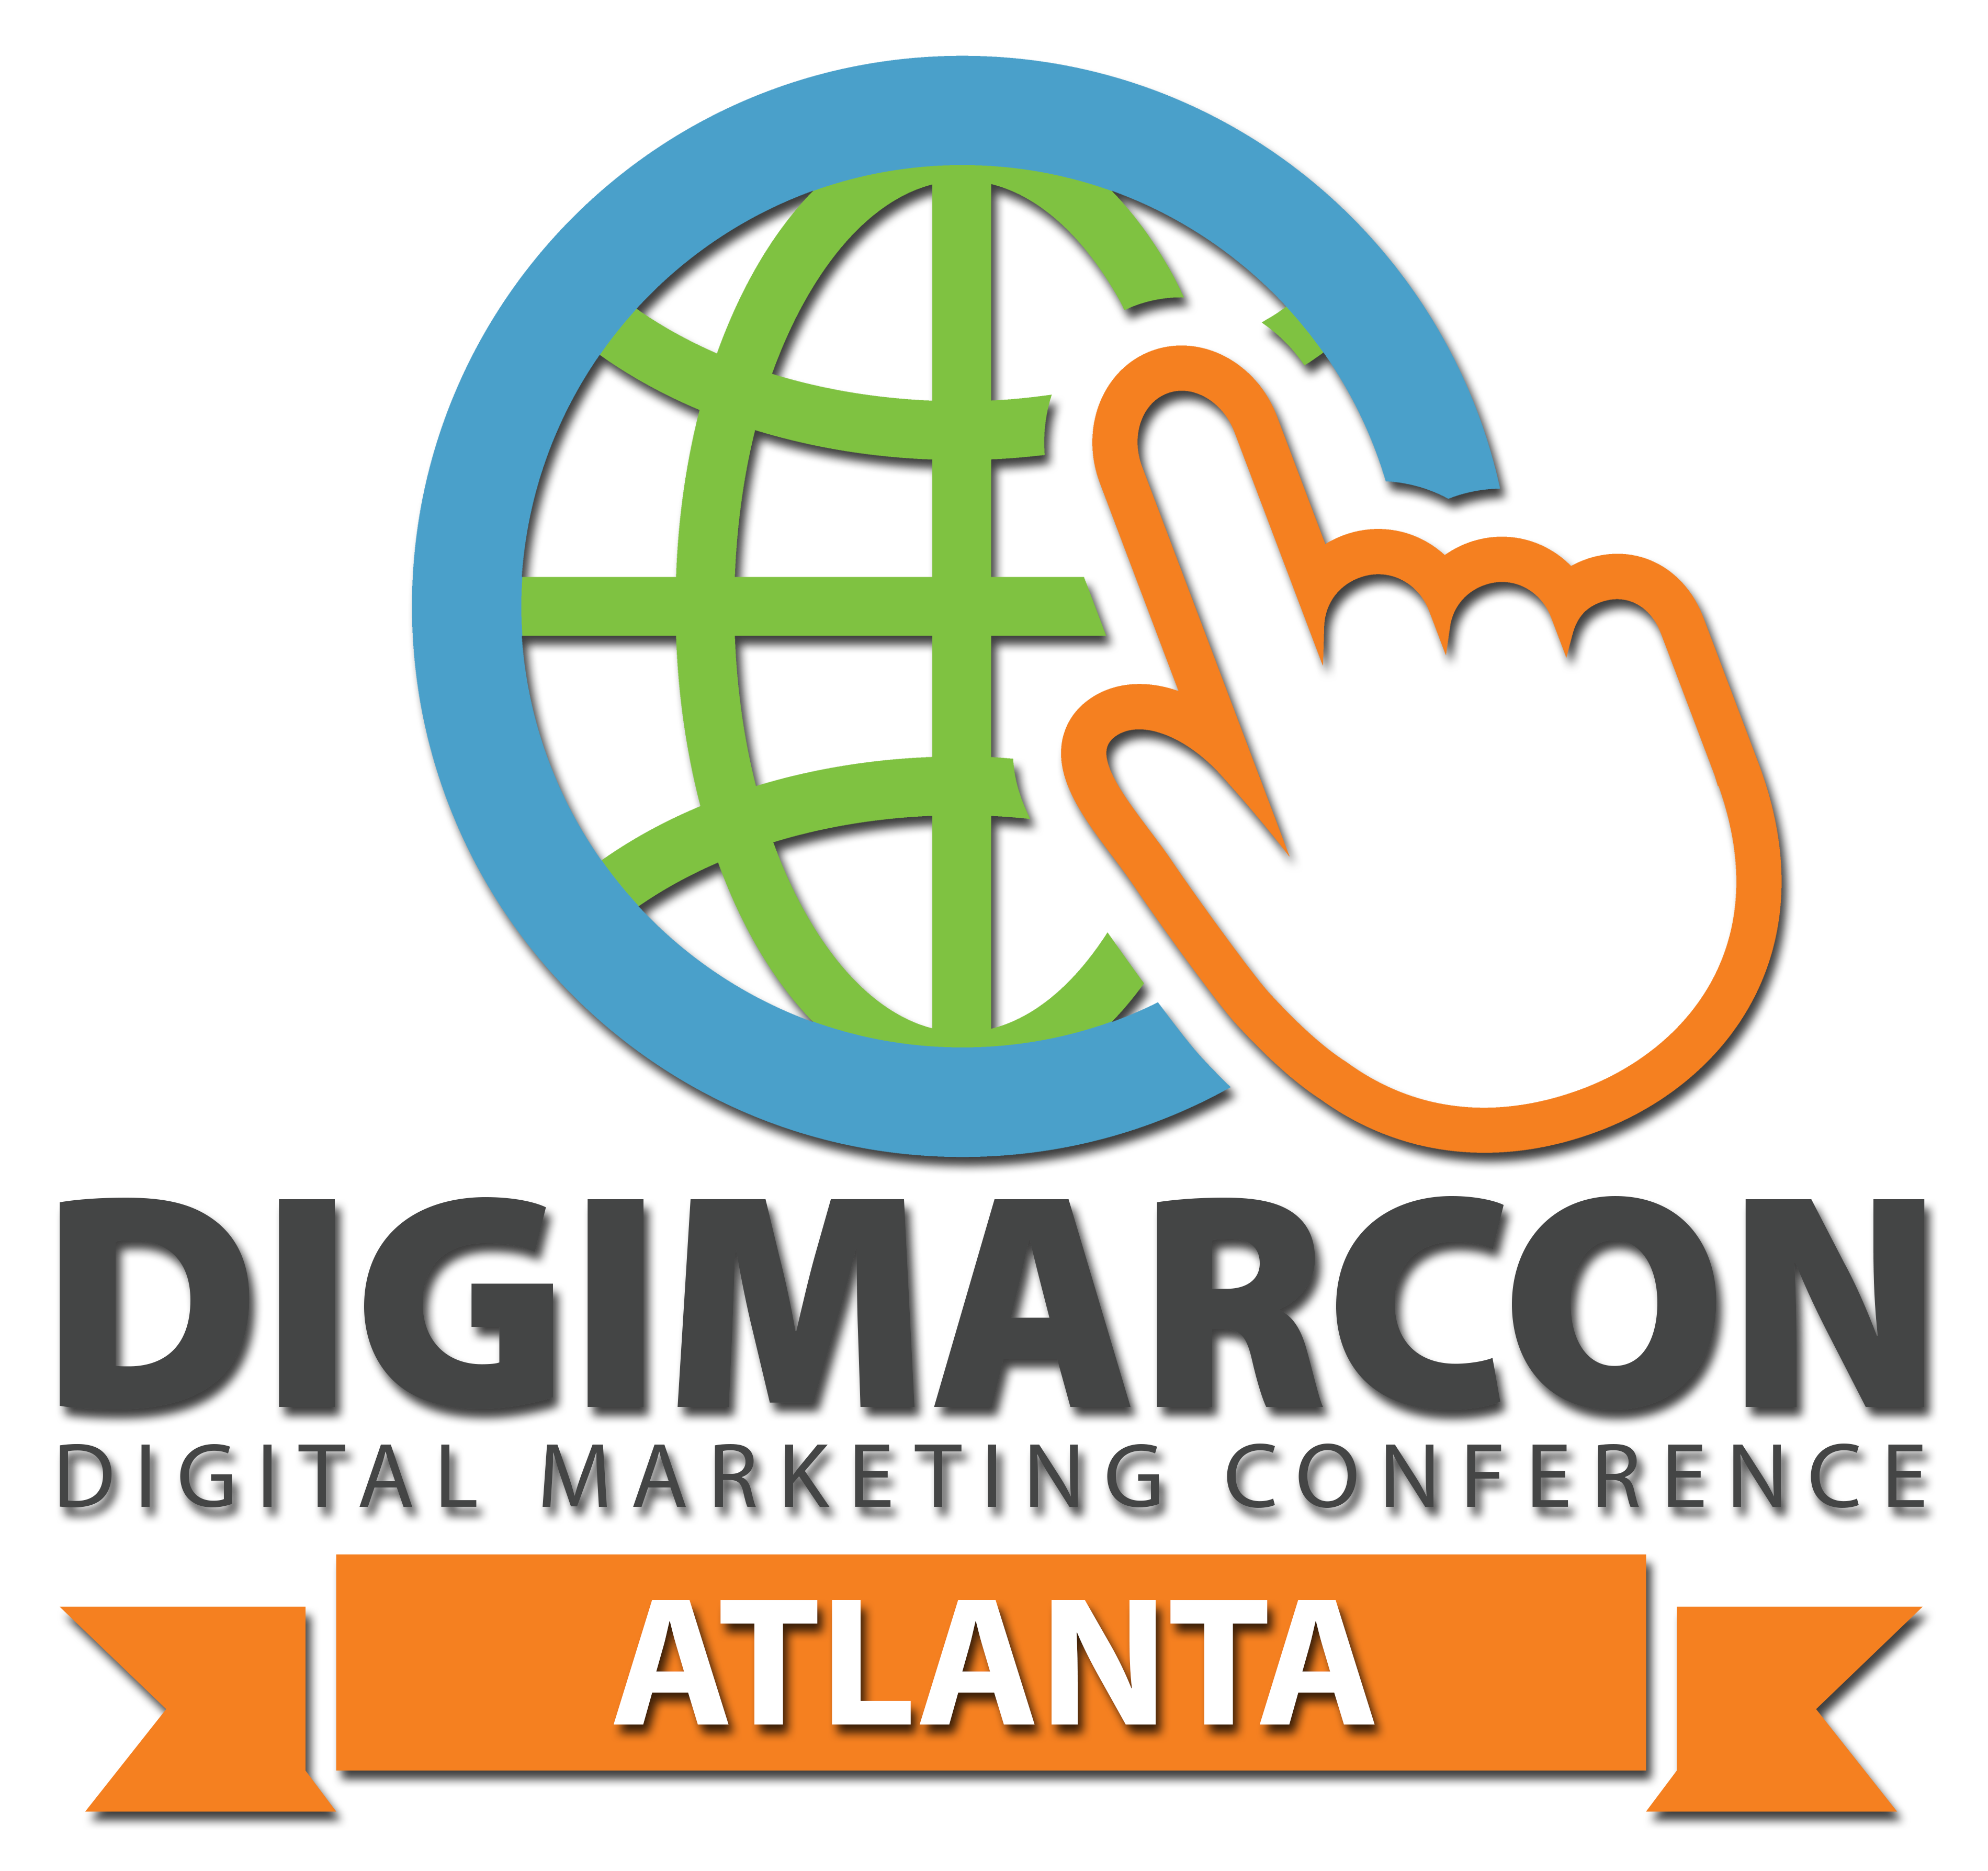 DigiMarCon Rocky Mountains – Digital Marketing, Media and Advertising Conference & Exhibition